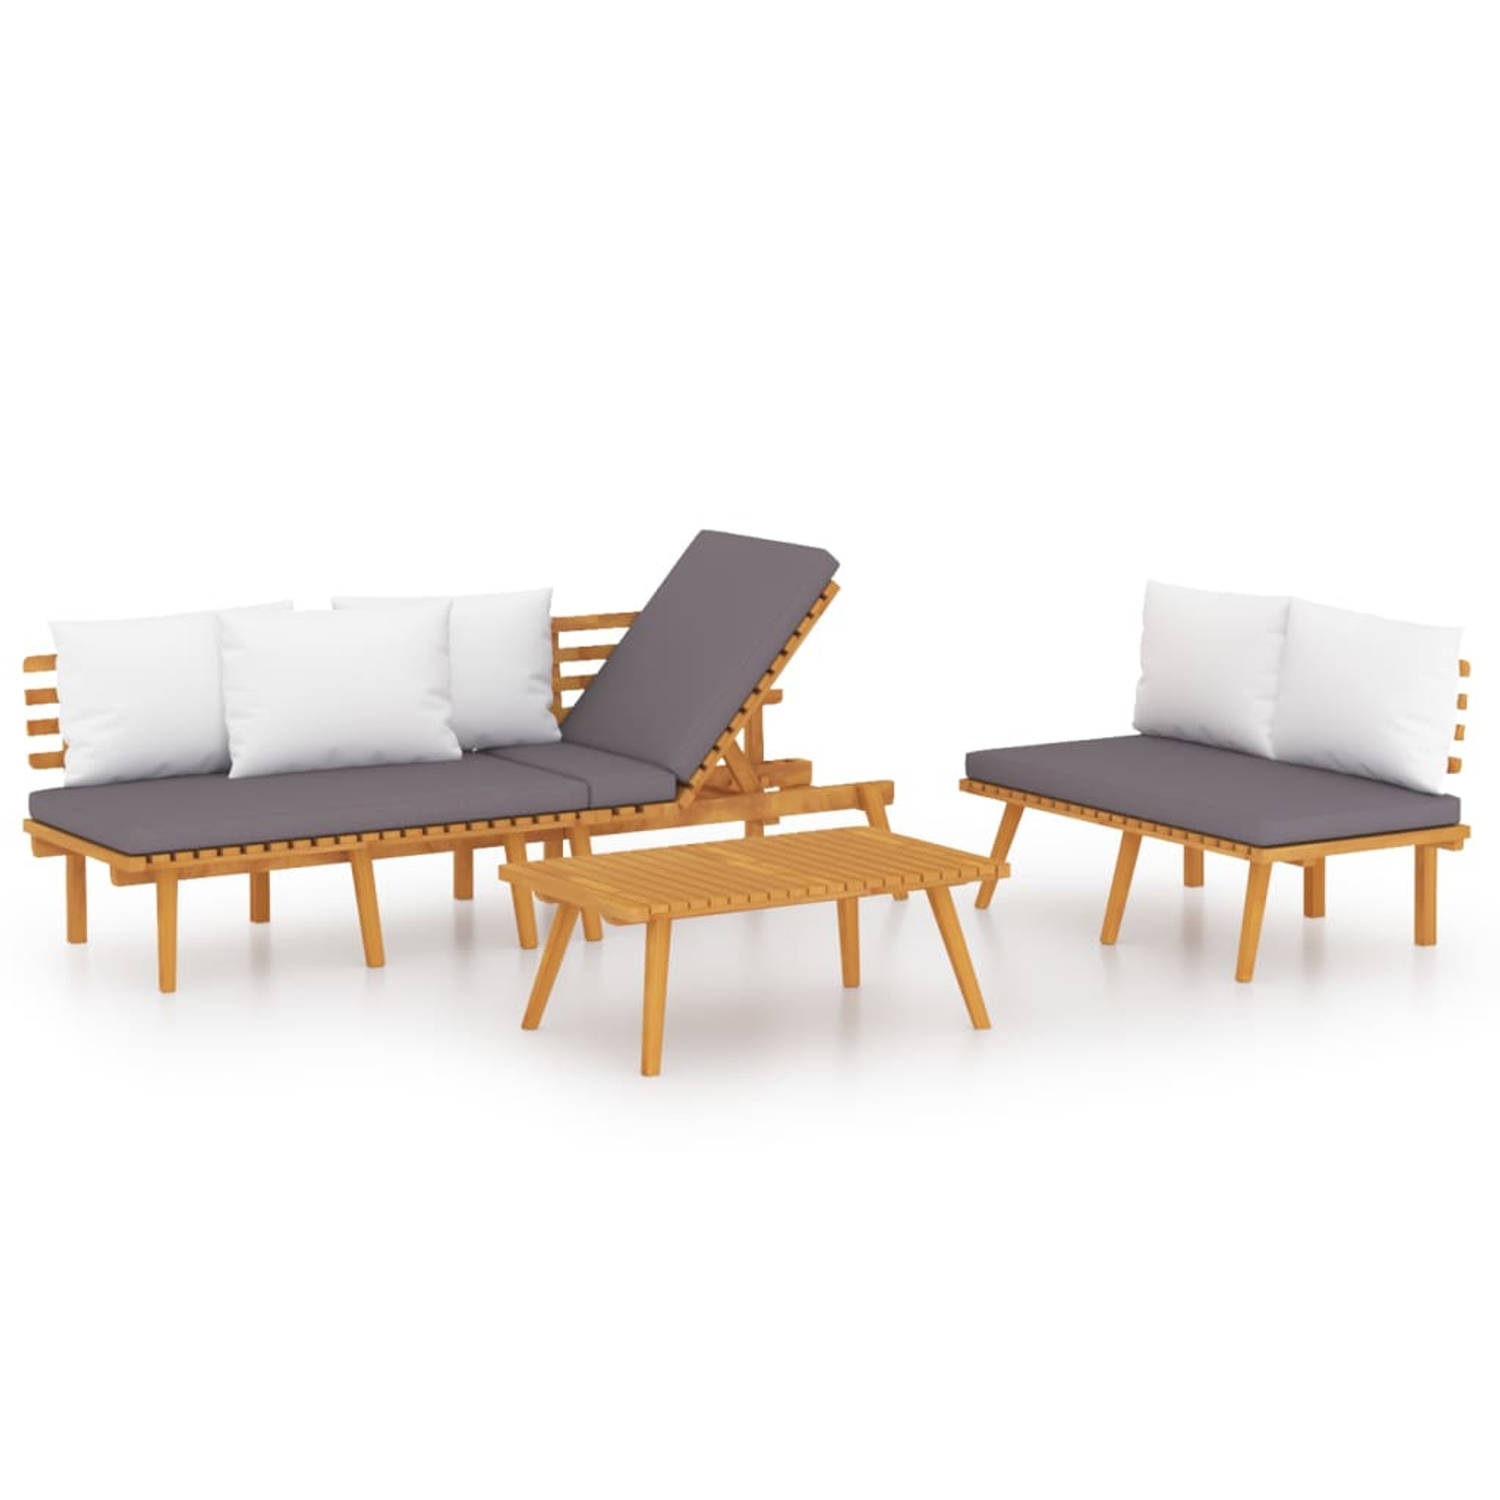 The Living Store 3-delige Loungeset met kussens massief acaciahout - Tuinset